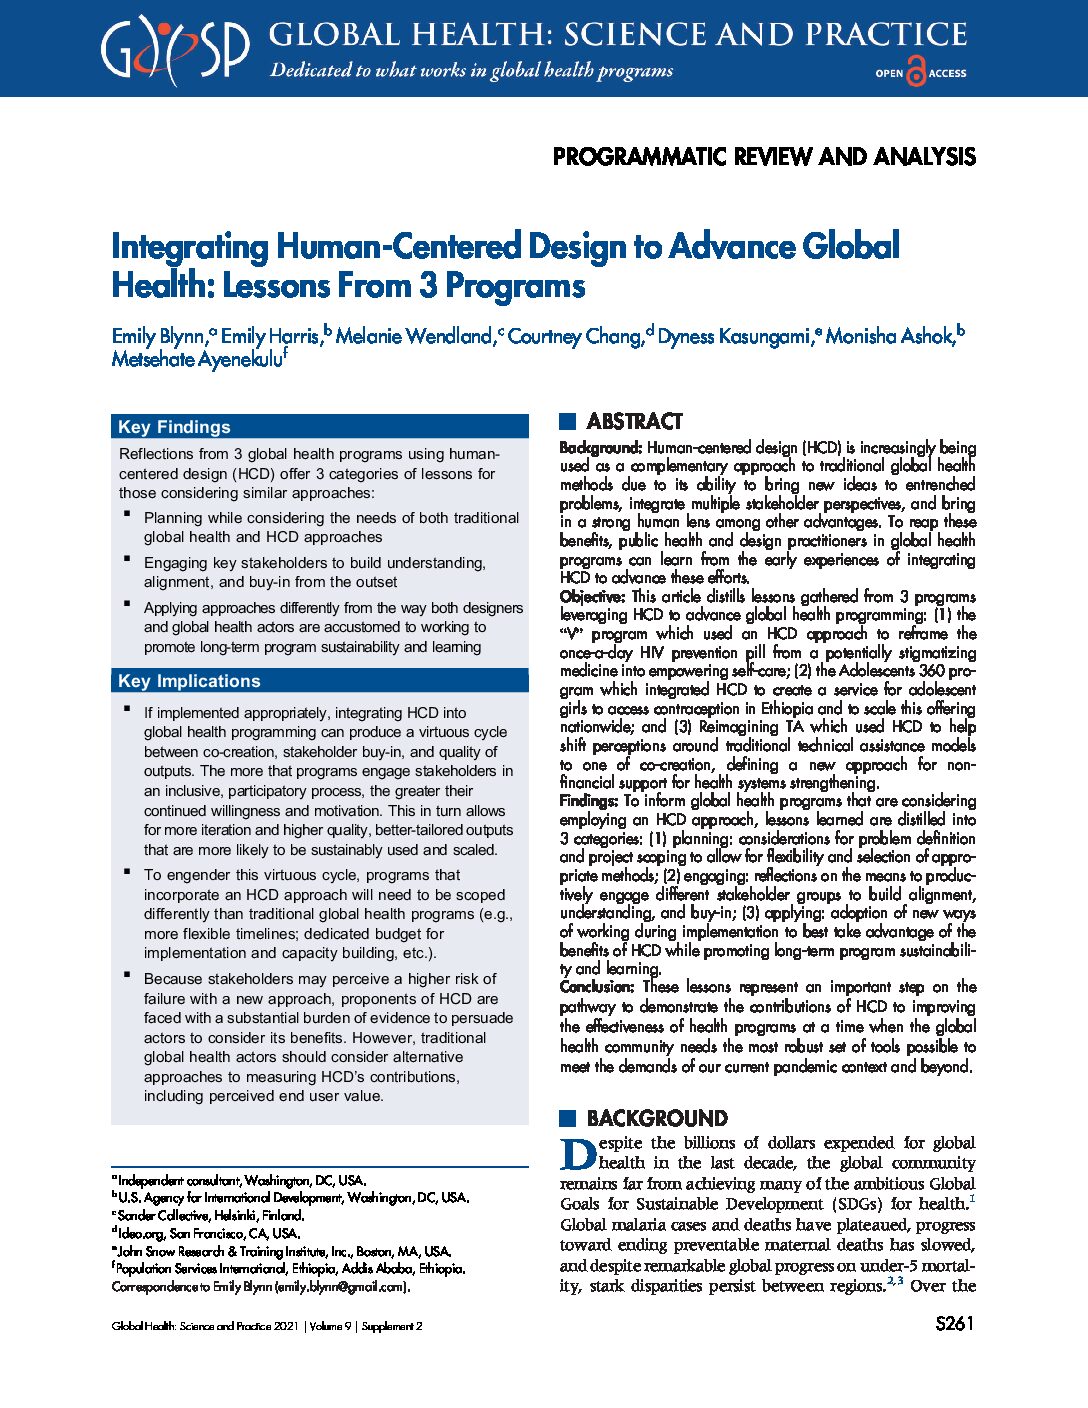 Integrating Human-Centered Design to Advance Global Health: Lessons From 3 Programs